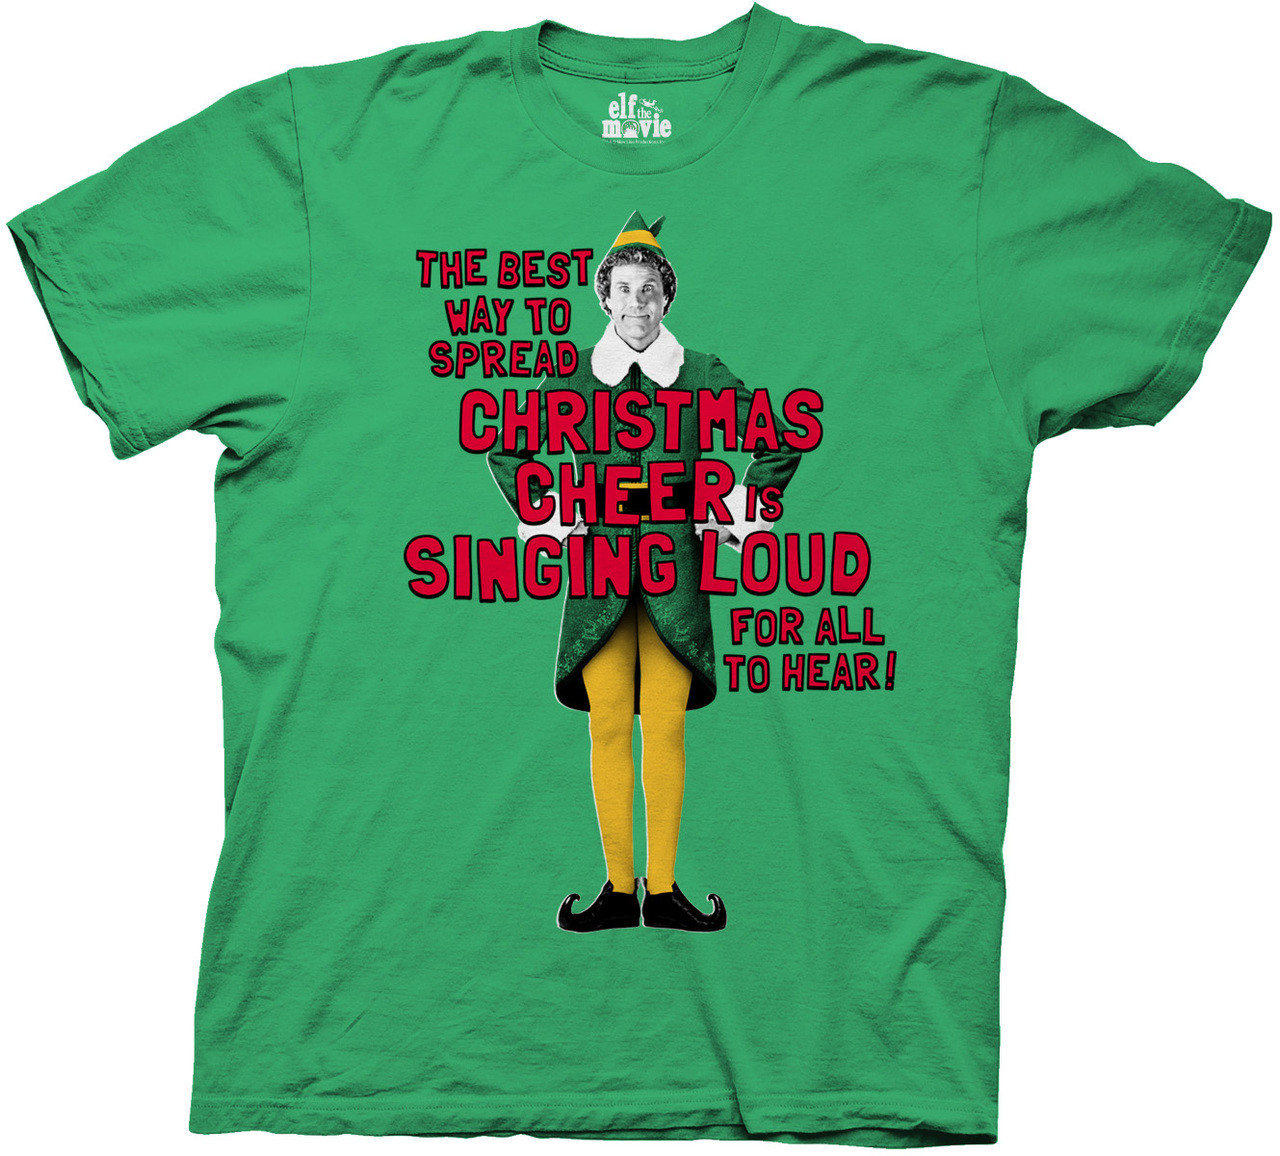 Elf the Movie Singing Loud For All To Hear T-Shirt - RetroFestive.ca